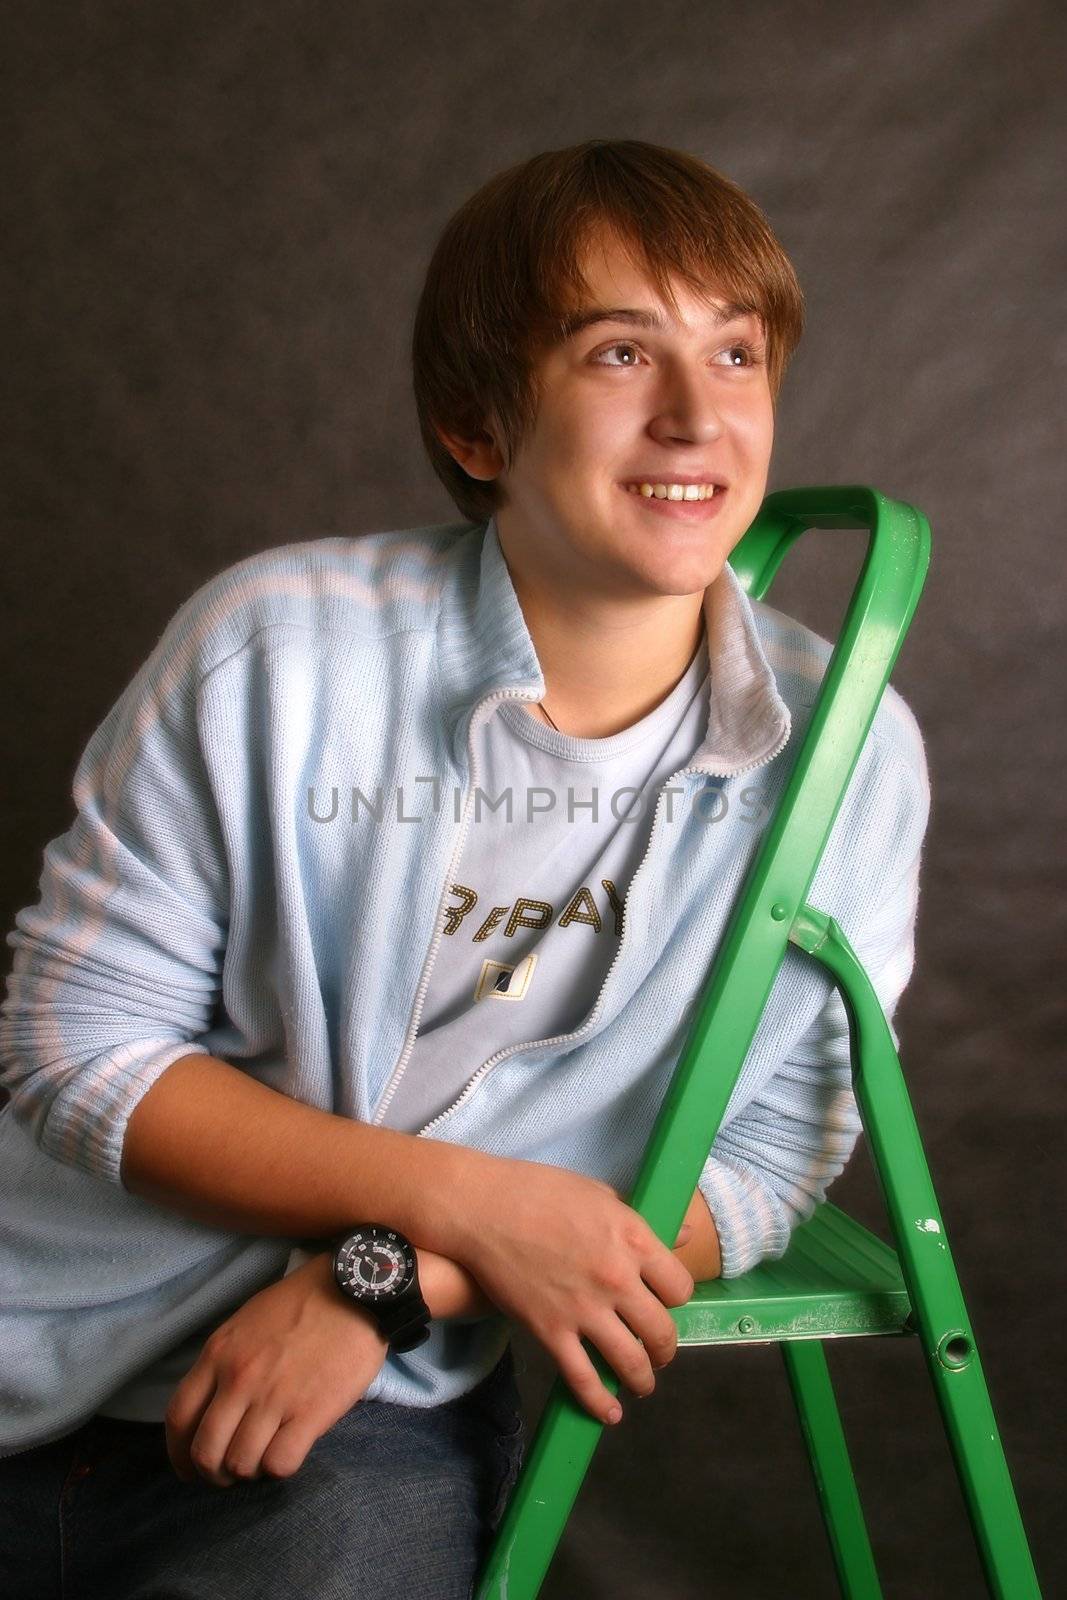 The young man with a green step-ladder